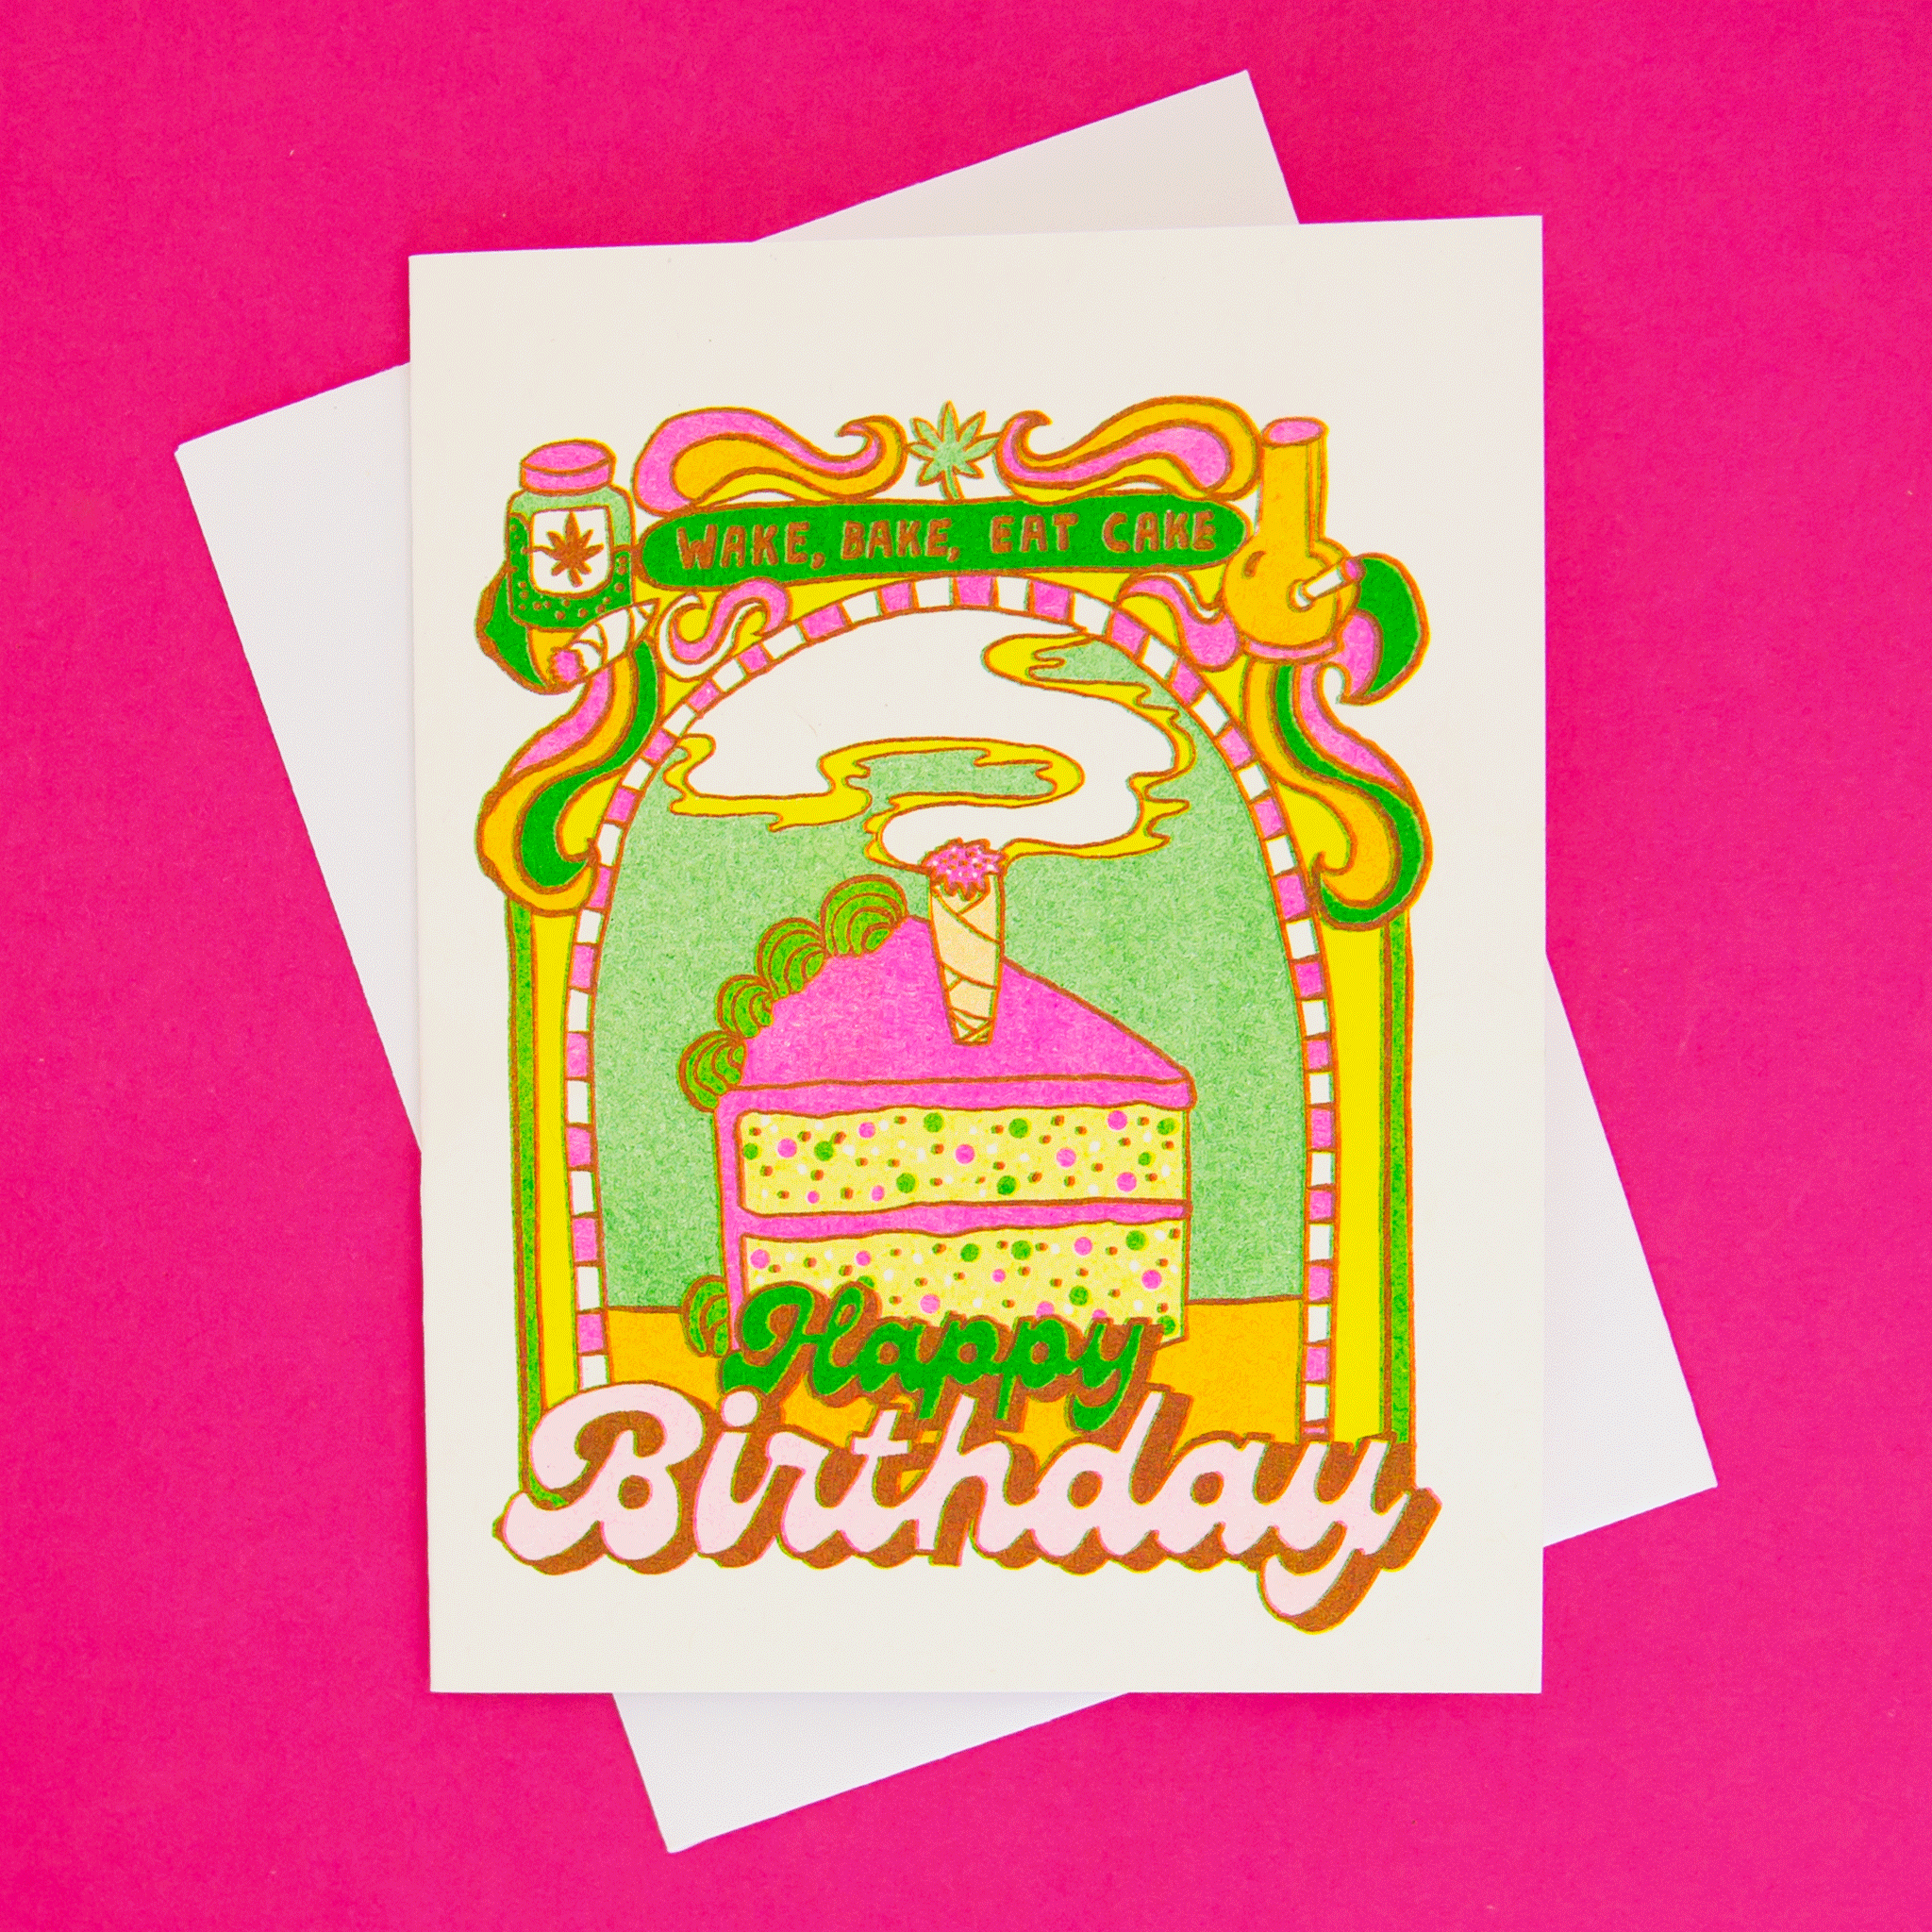 On a hot pink background is a colorful green, yellow and pink card with a cake illustration in the center with a pre-roll in the center and text that reads, &quot;Wake, Bake, Eat Cake Happy Birthday&quot;.